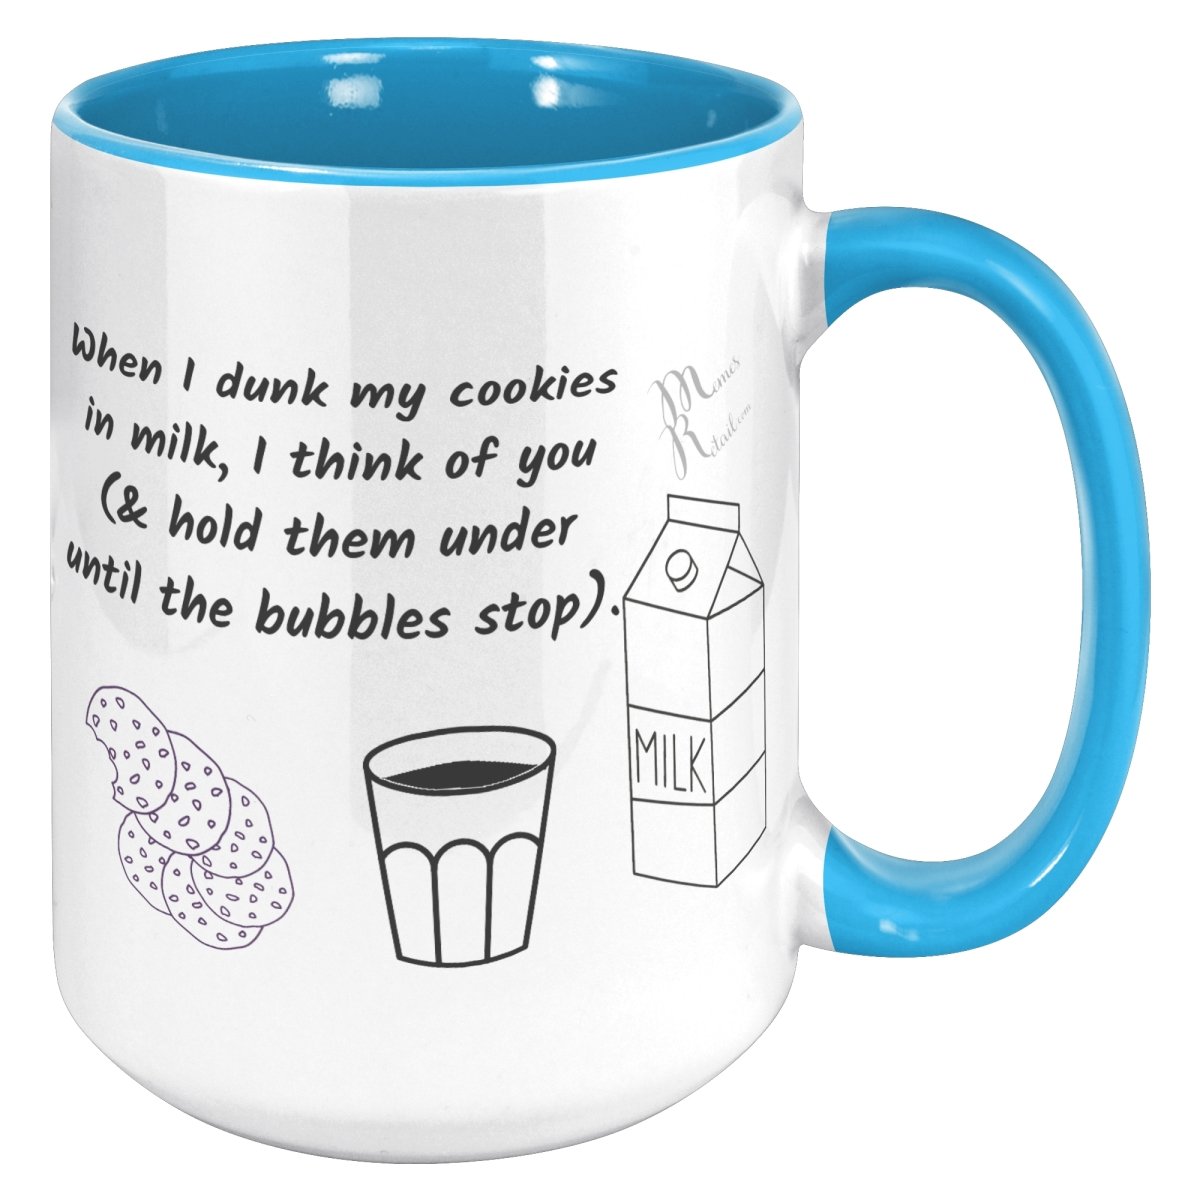 When I dunk My Cookies in Milk, I think of You - 11oz/15oz Mugs, 15oz / Blue Accent - MemesRetail.com